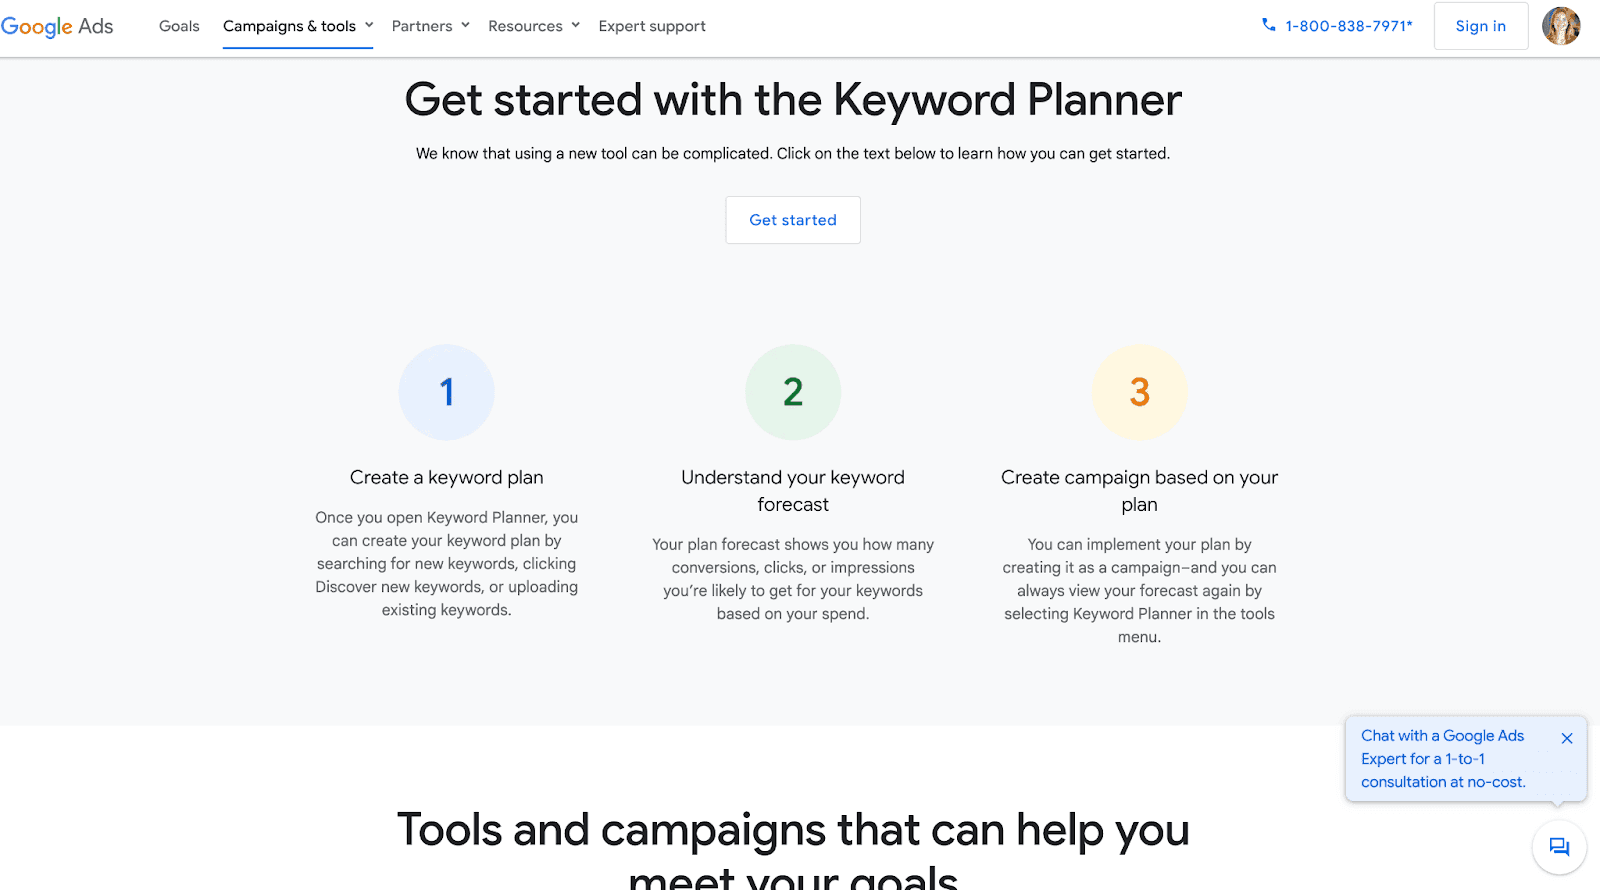 3 steps to get started with the Keyword Planner - Create a keyword plan, understand your keyword forecast, and create campaign based on your plan